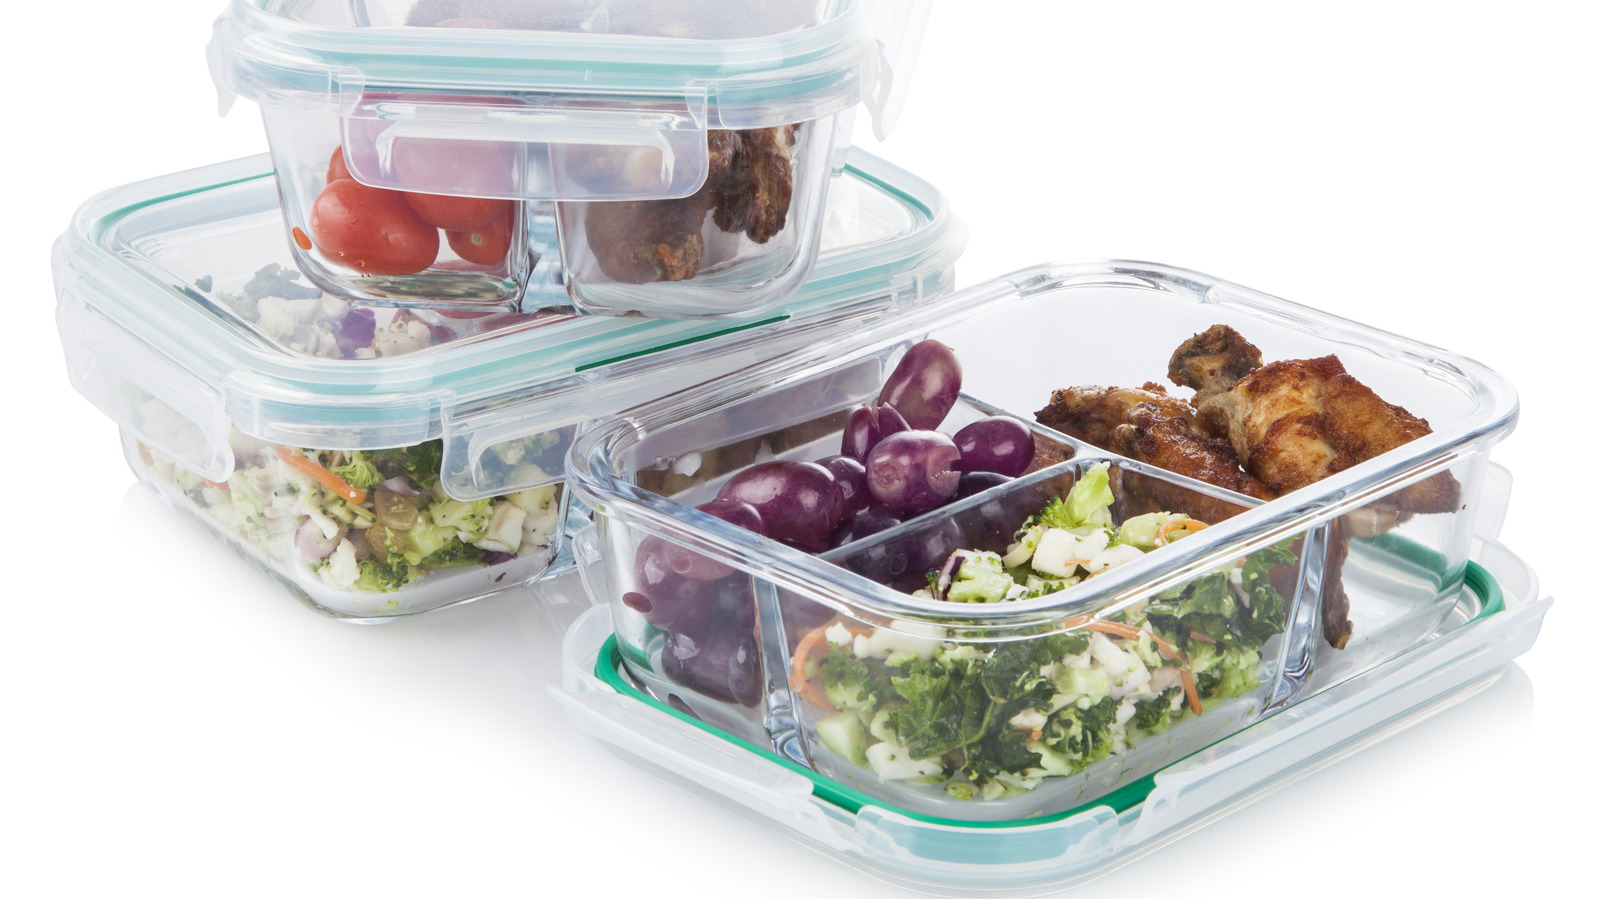 12 Common Mistakes to Avoid When Meal Prepping - Bariatric Meal Prep